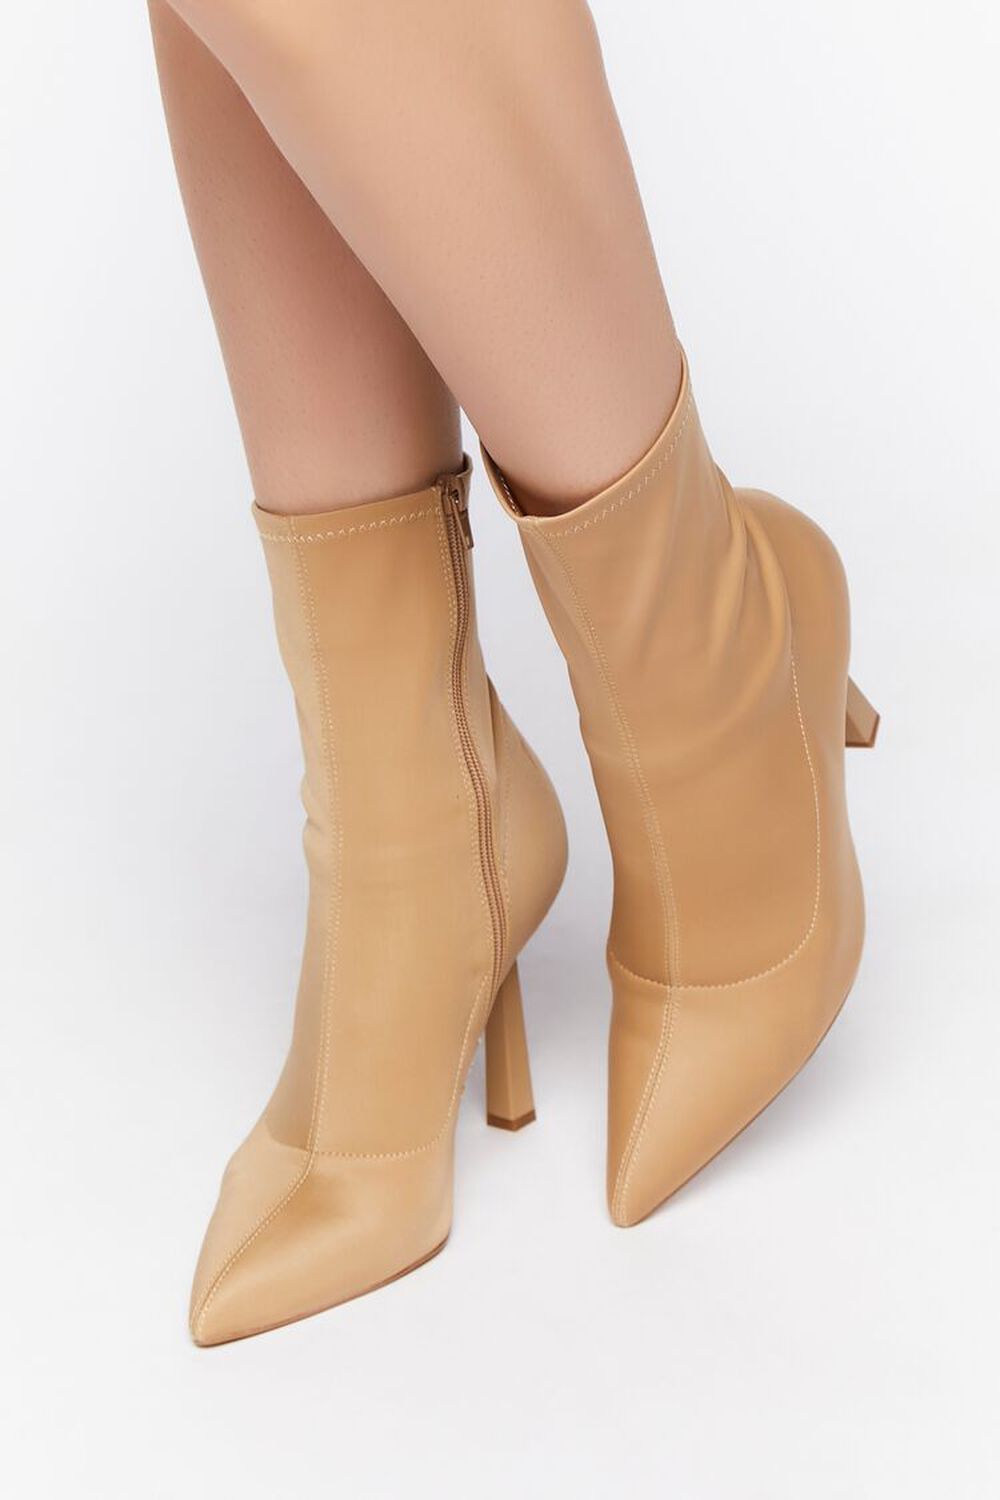 NUDE Pointed-Toe Stiletto Sock Booties, image 1